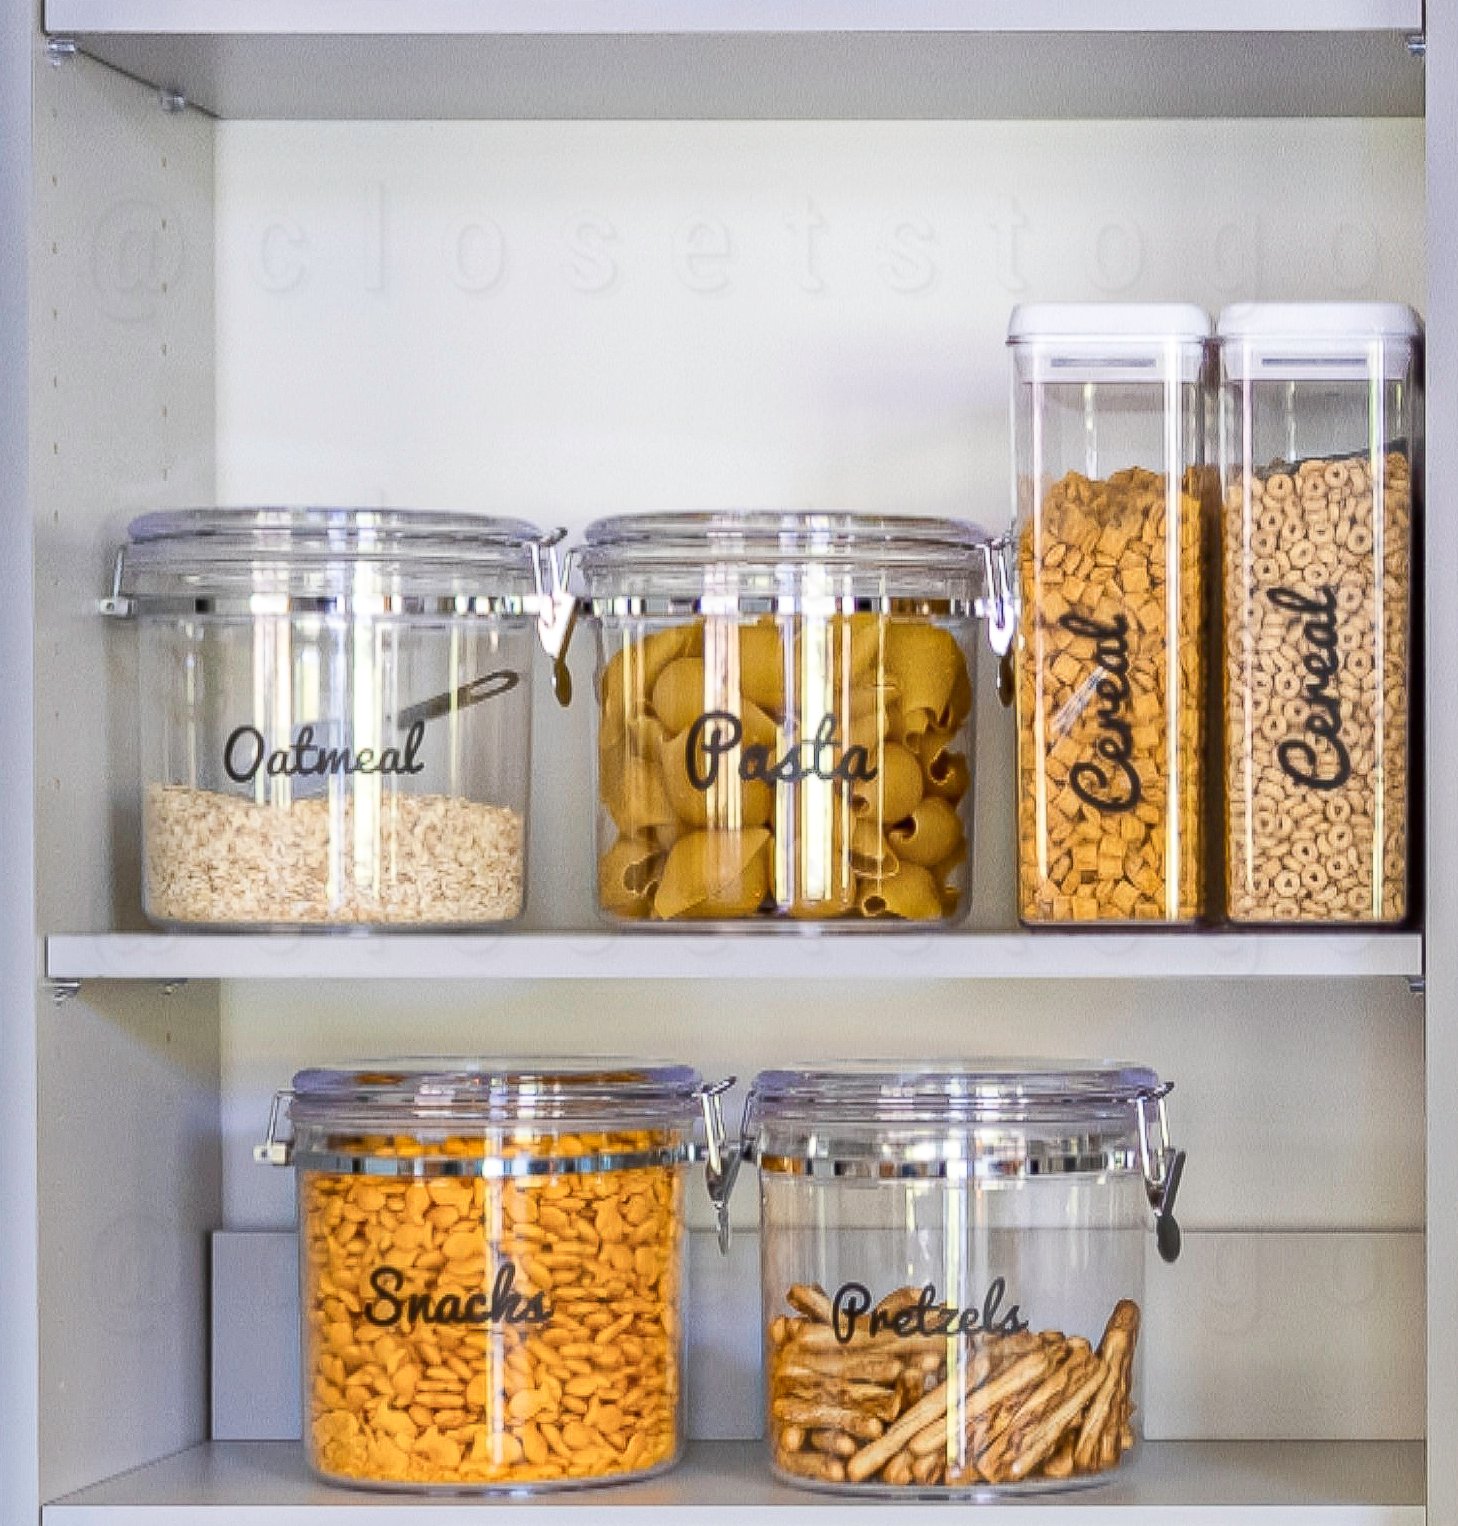 View of the pantry's shelf